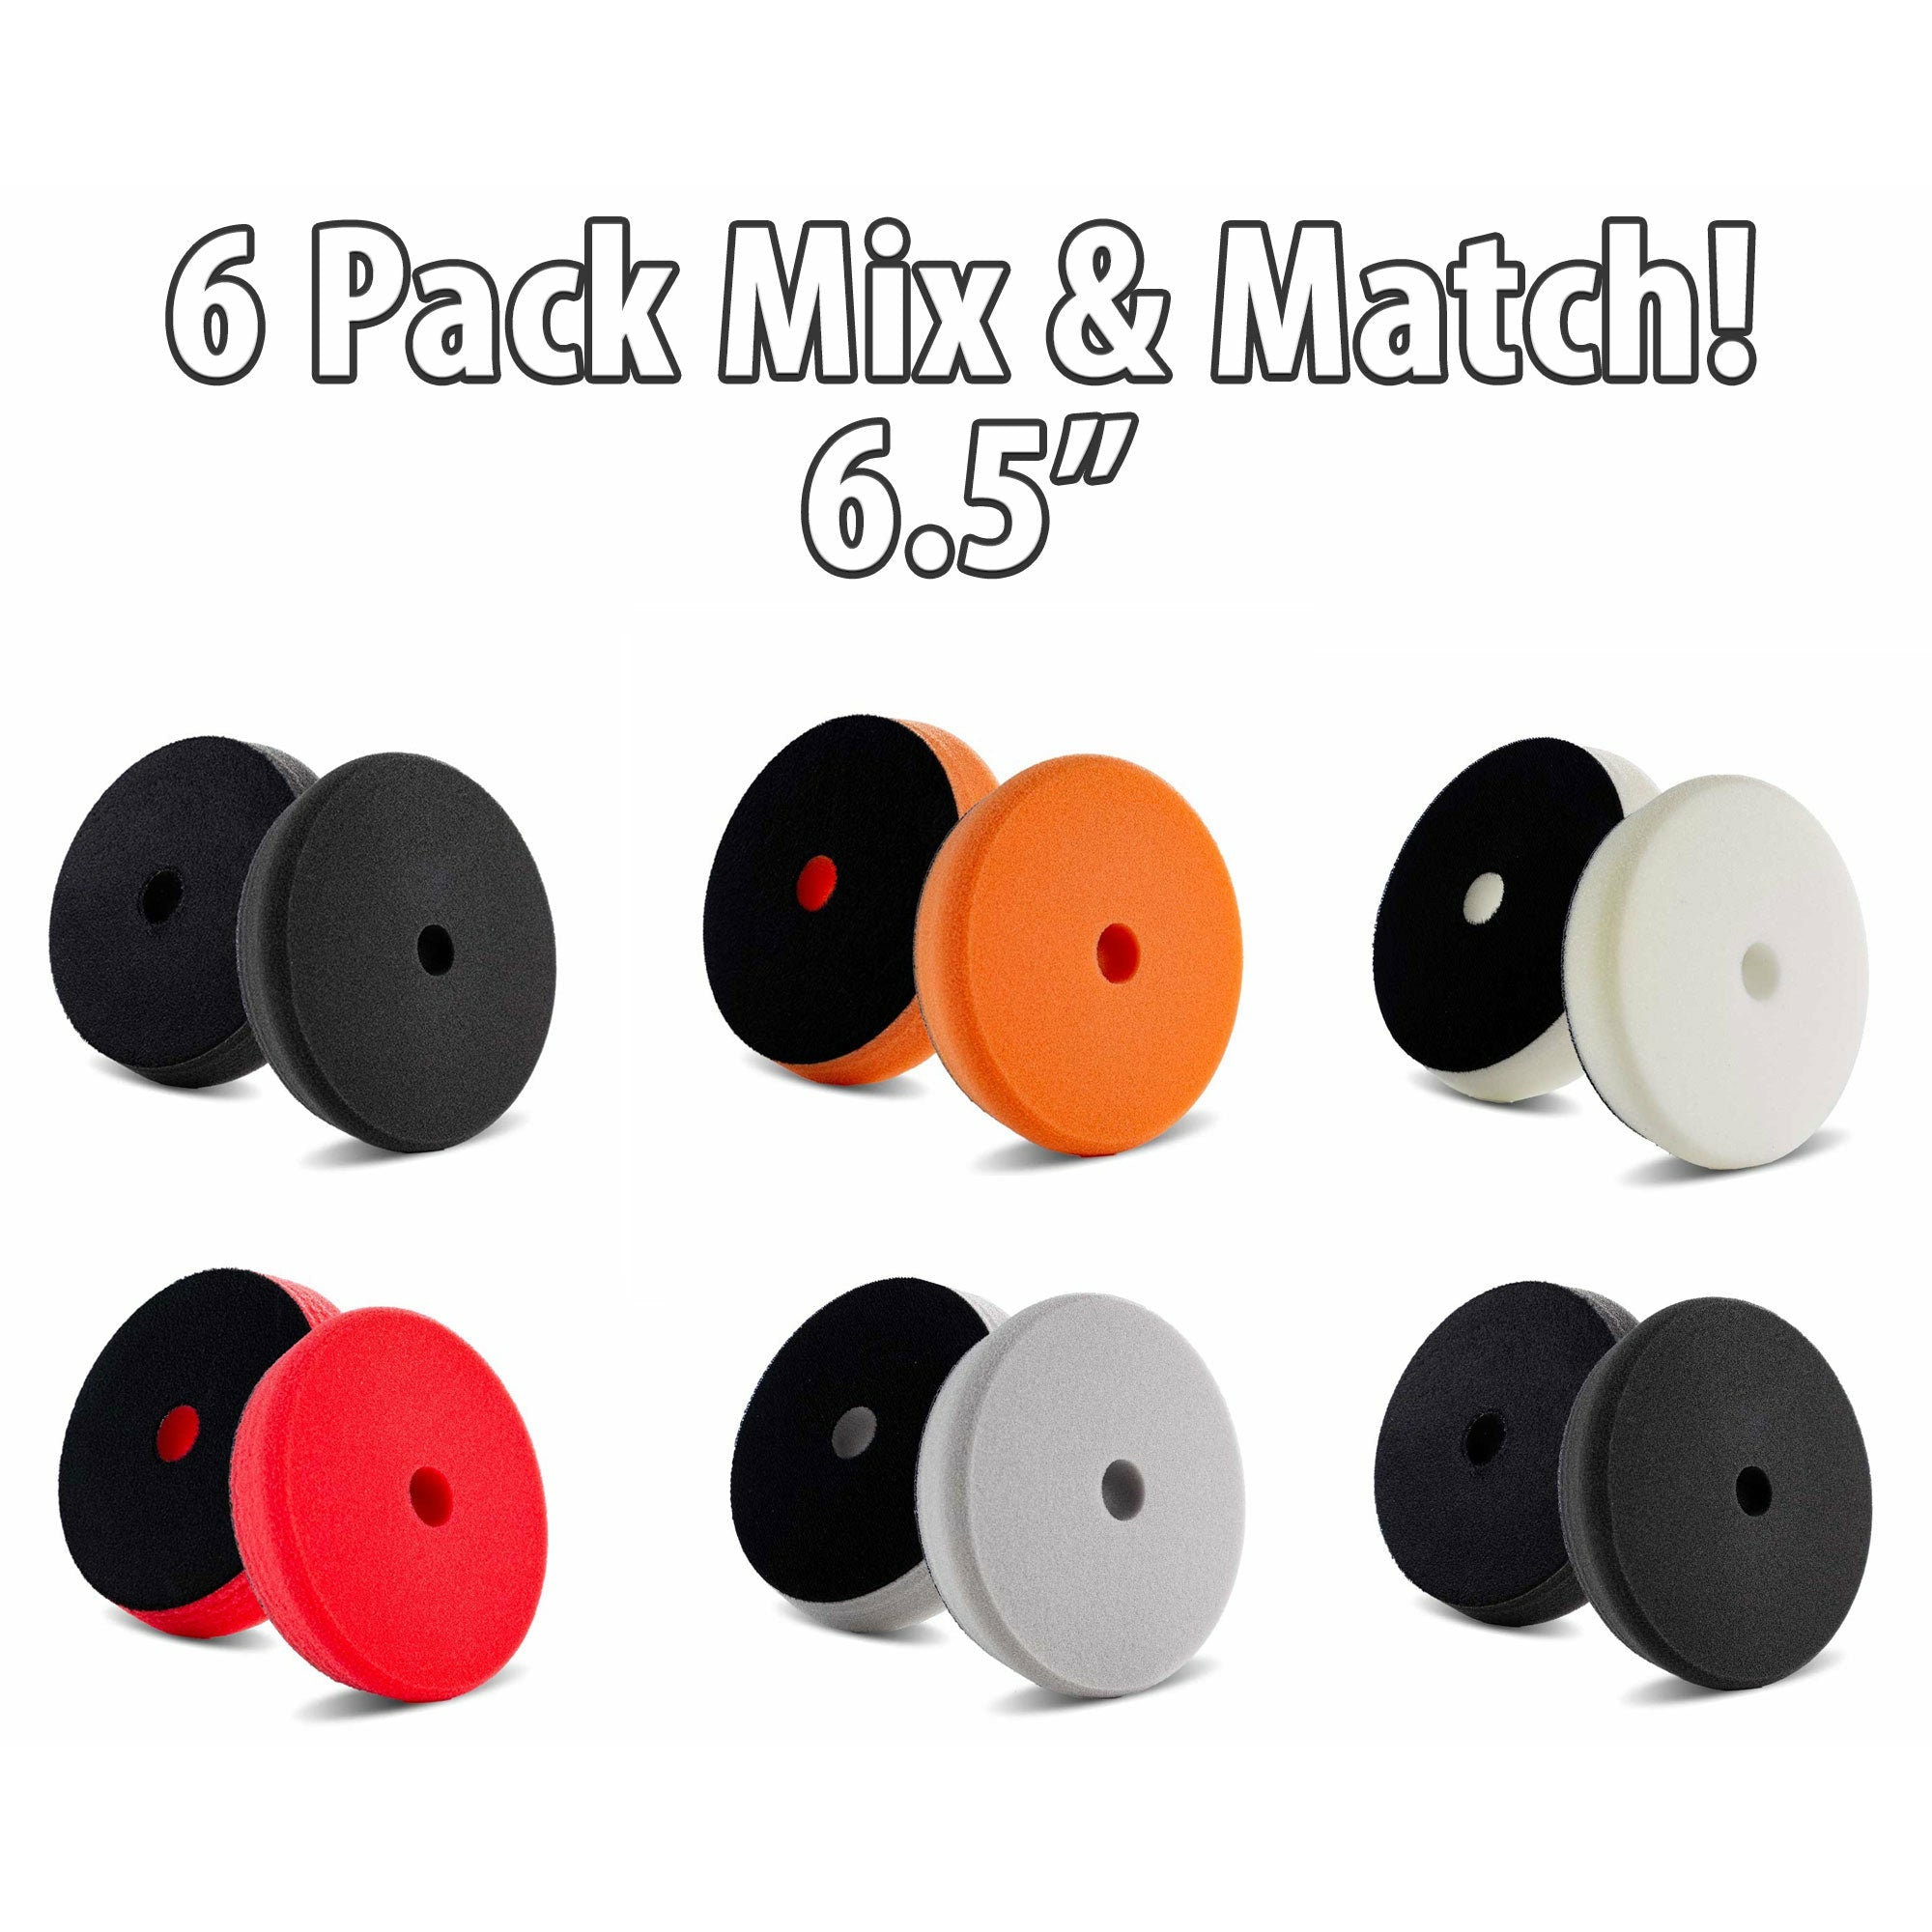 6 Pack 6.5 Inch Lake Country Force Hybrid Foam Pad - Your Choice - FREE BONUS!